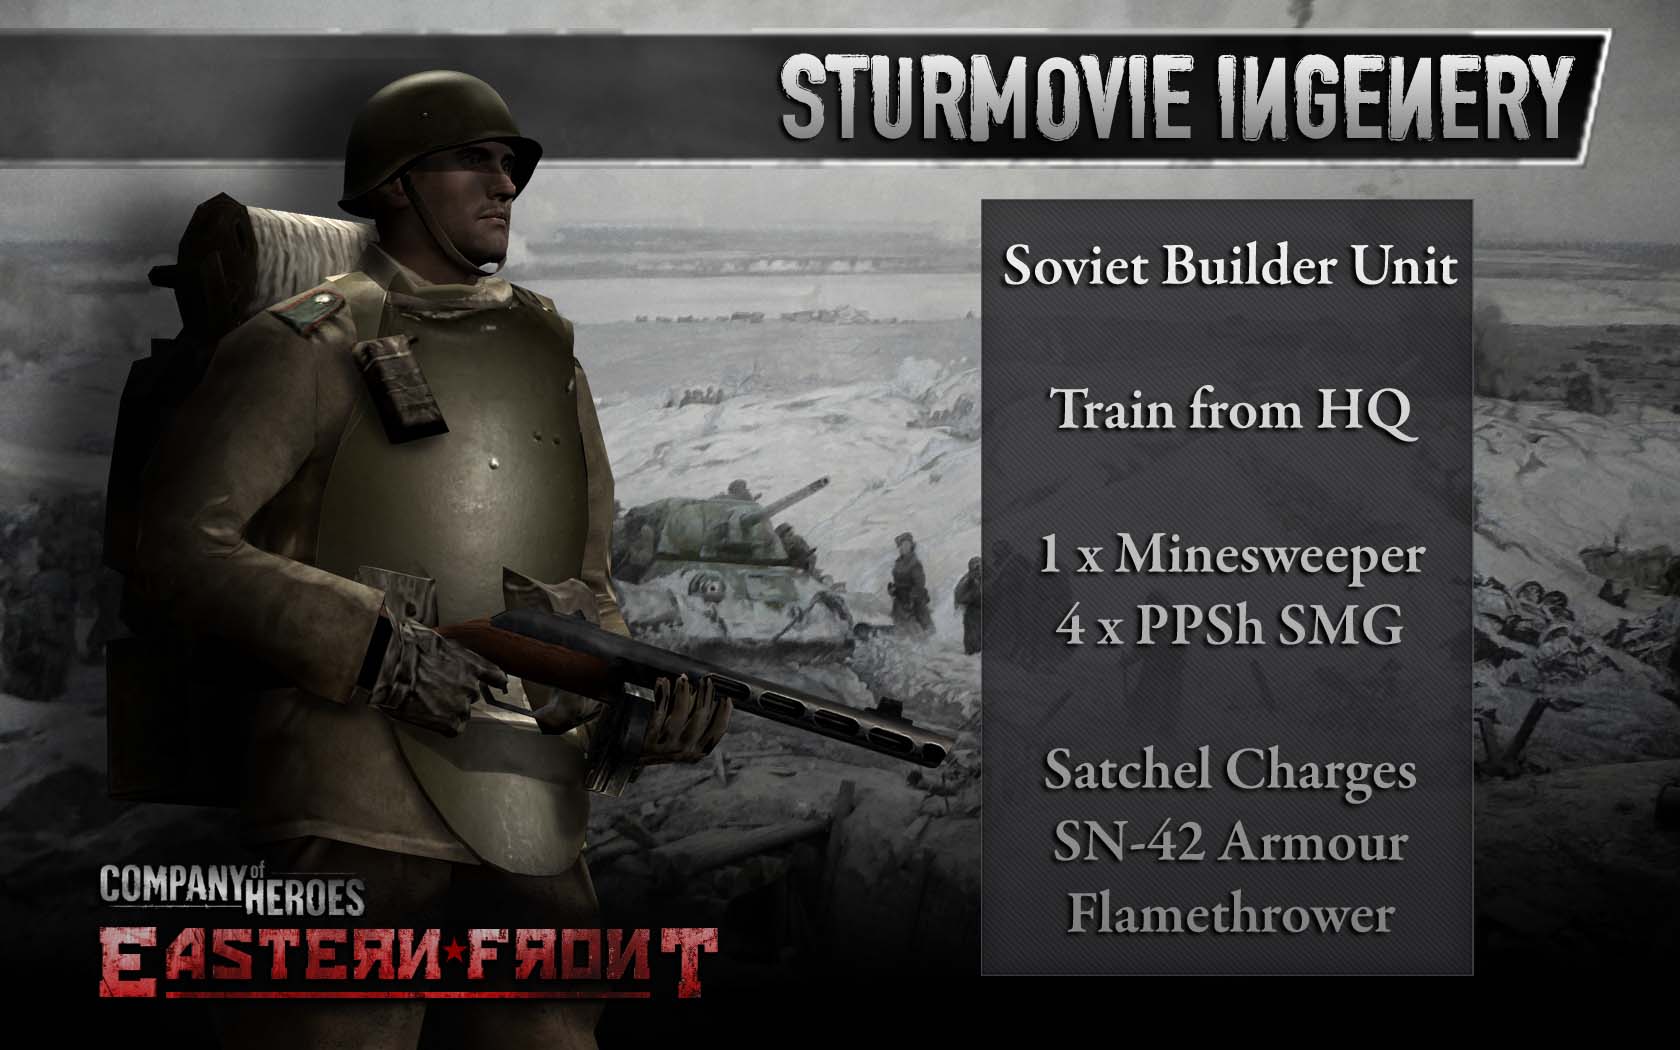 company of heroes eastern front mod